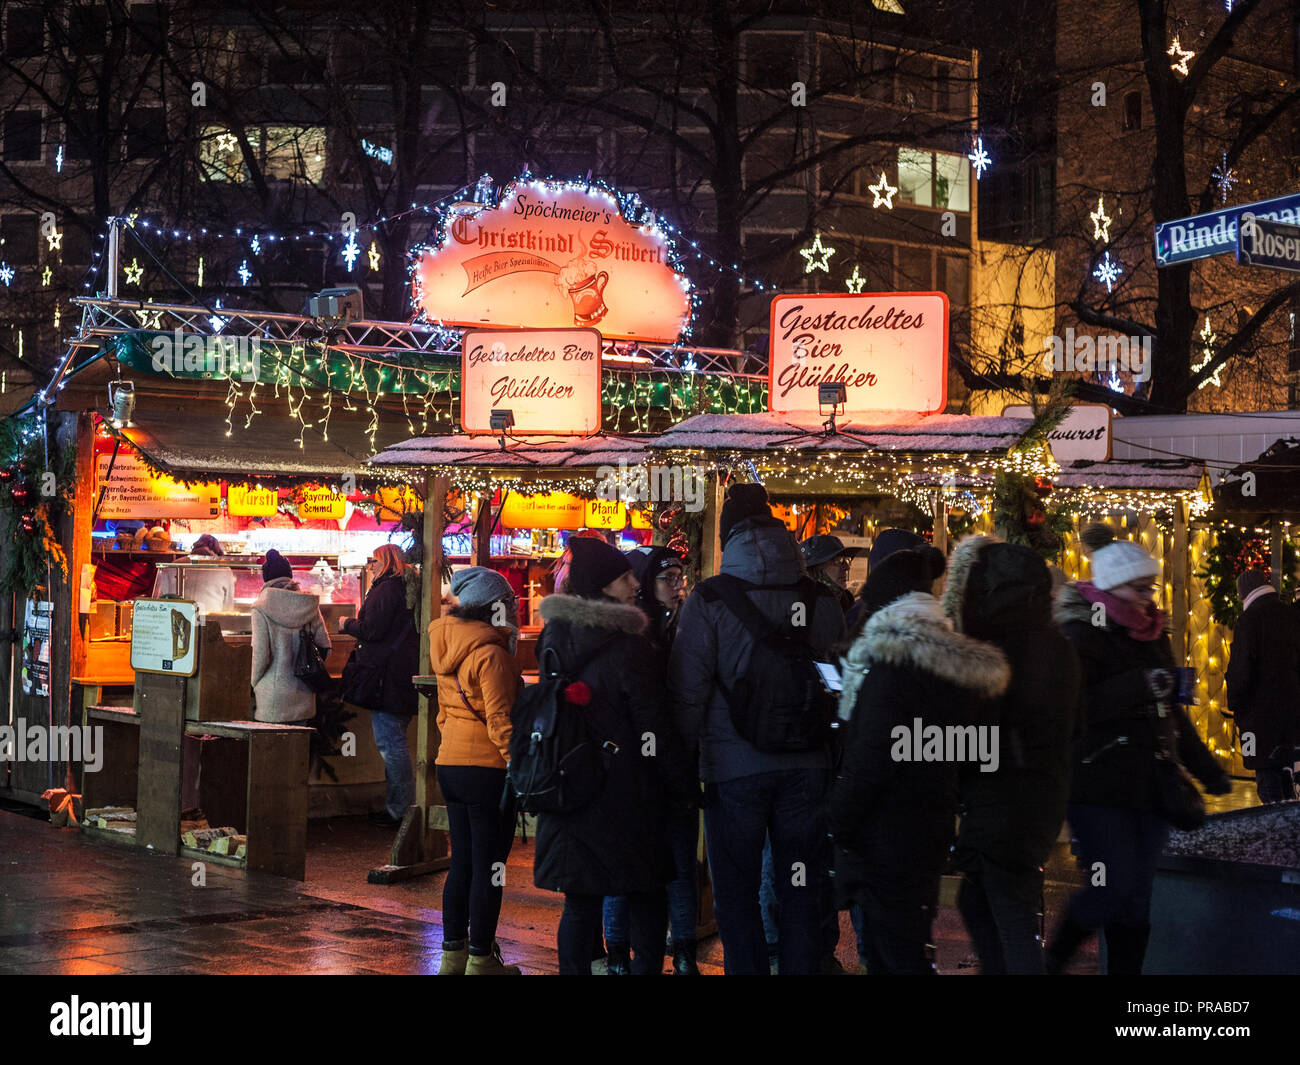 MUNICH, GERMANY - DECEMBER 17, 2017: Crowd gathering on front of the stands of the Munich Christmas market (Christkindlmarkt). Munich Christmas market Stock Photo